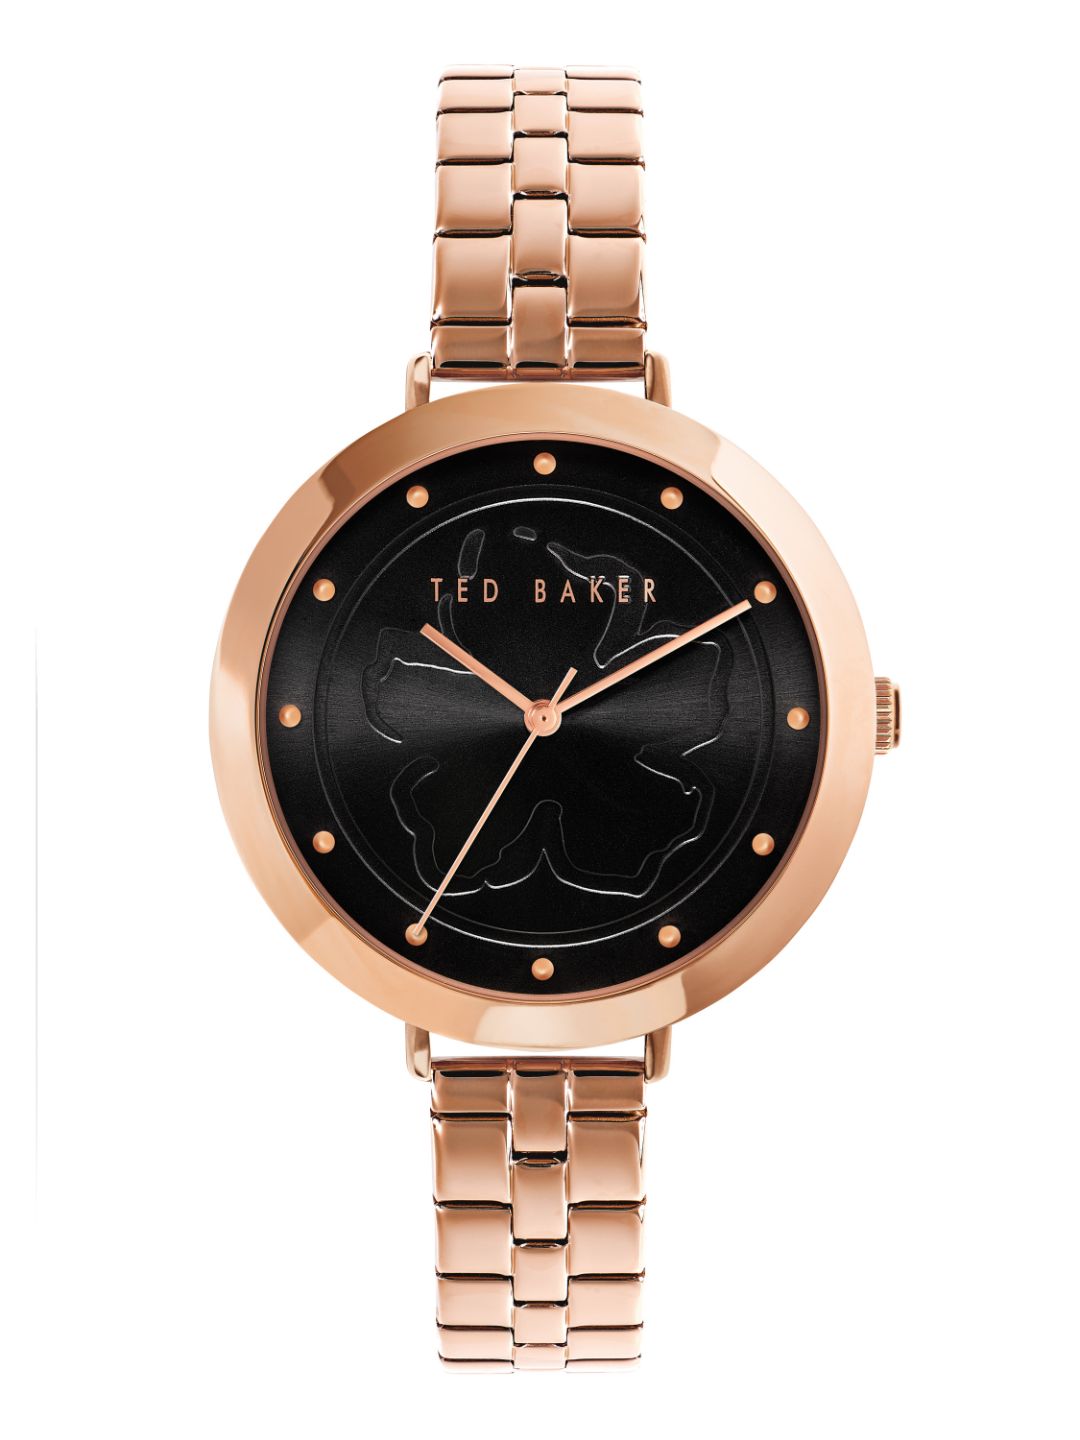 Ted Baker Black Dial Magnolia Watch for Women - BKPAMS216